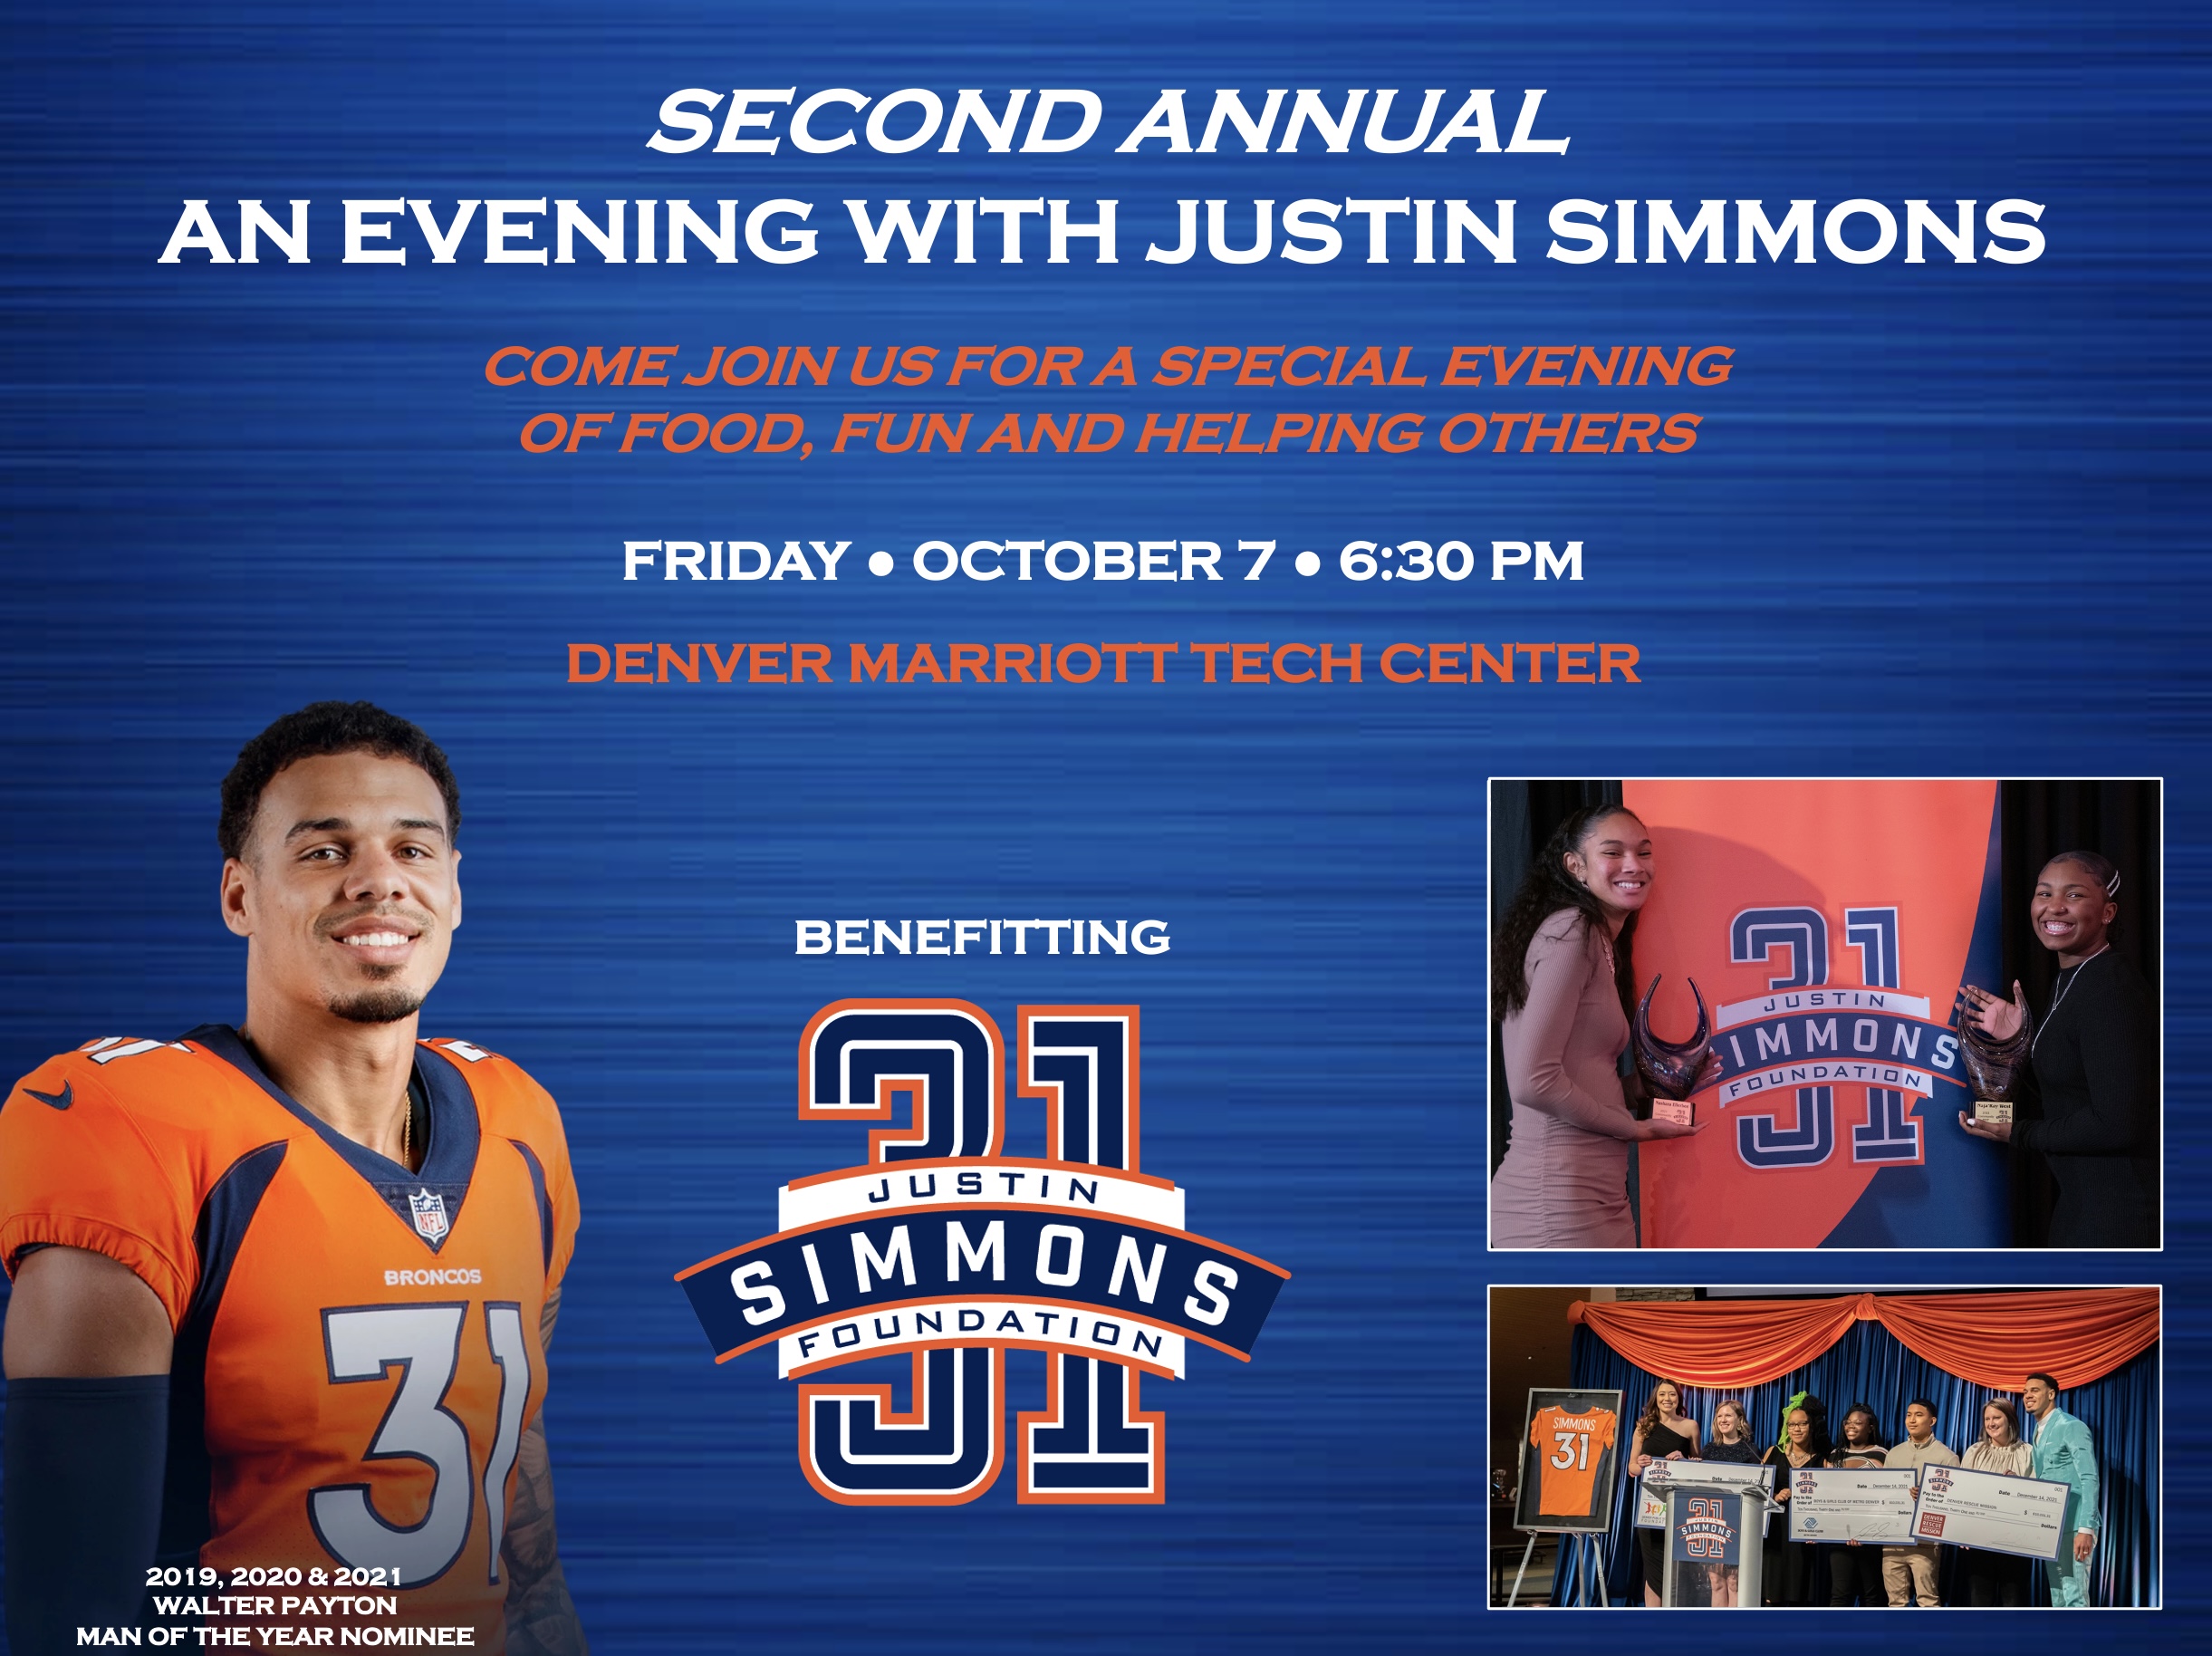 Justin Simmons To Hold Annual Foundation Event 